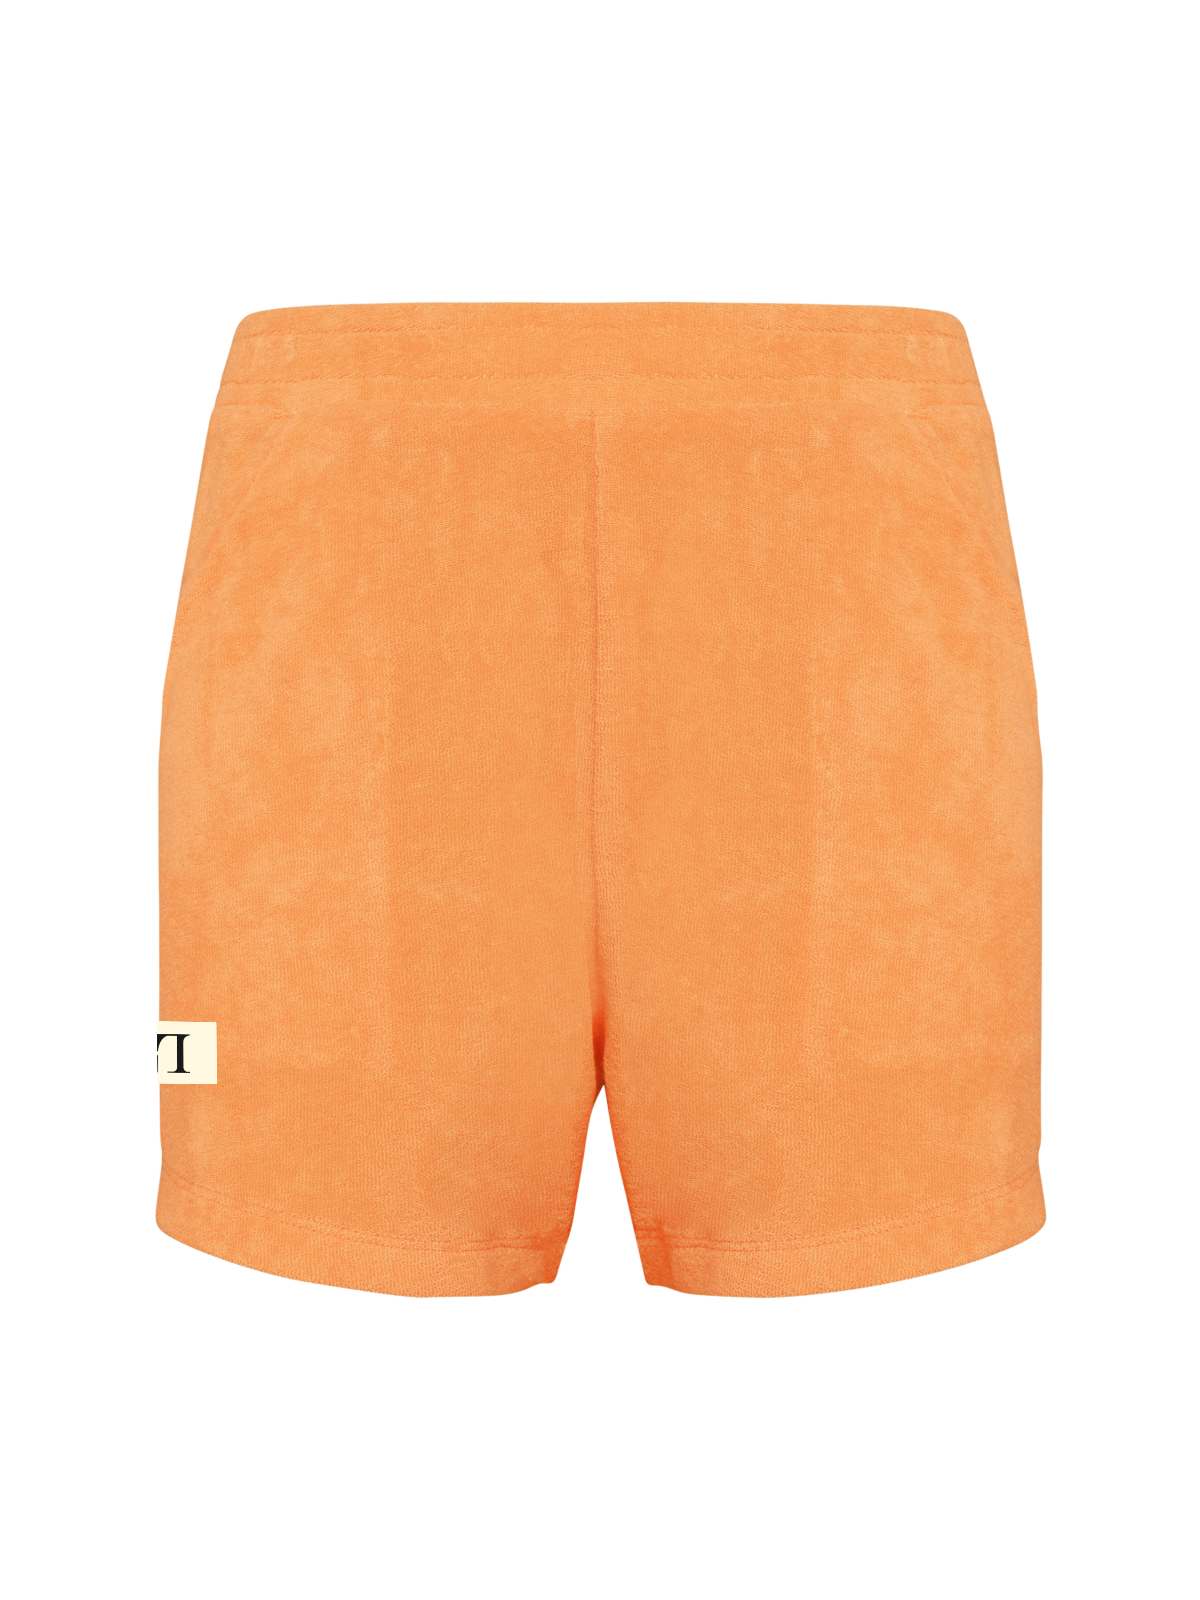 LL Terry Towel Girly Shorts apricot